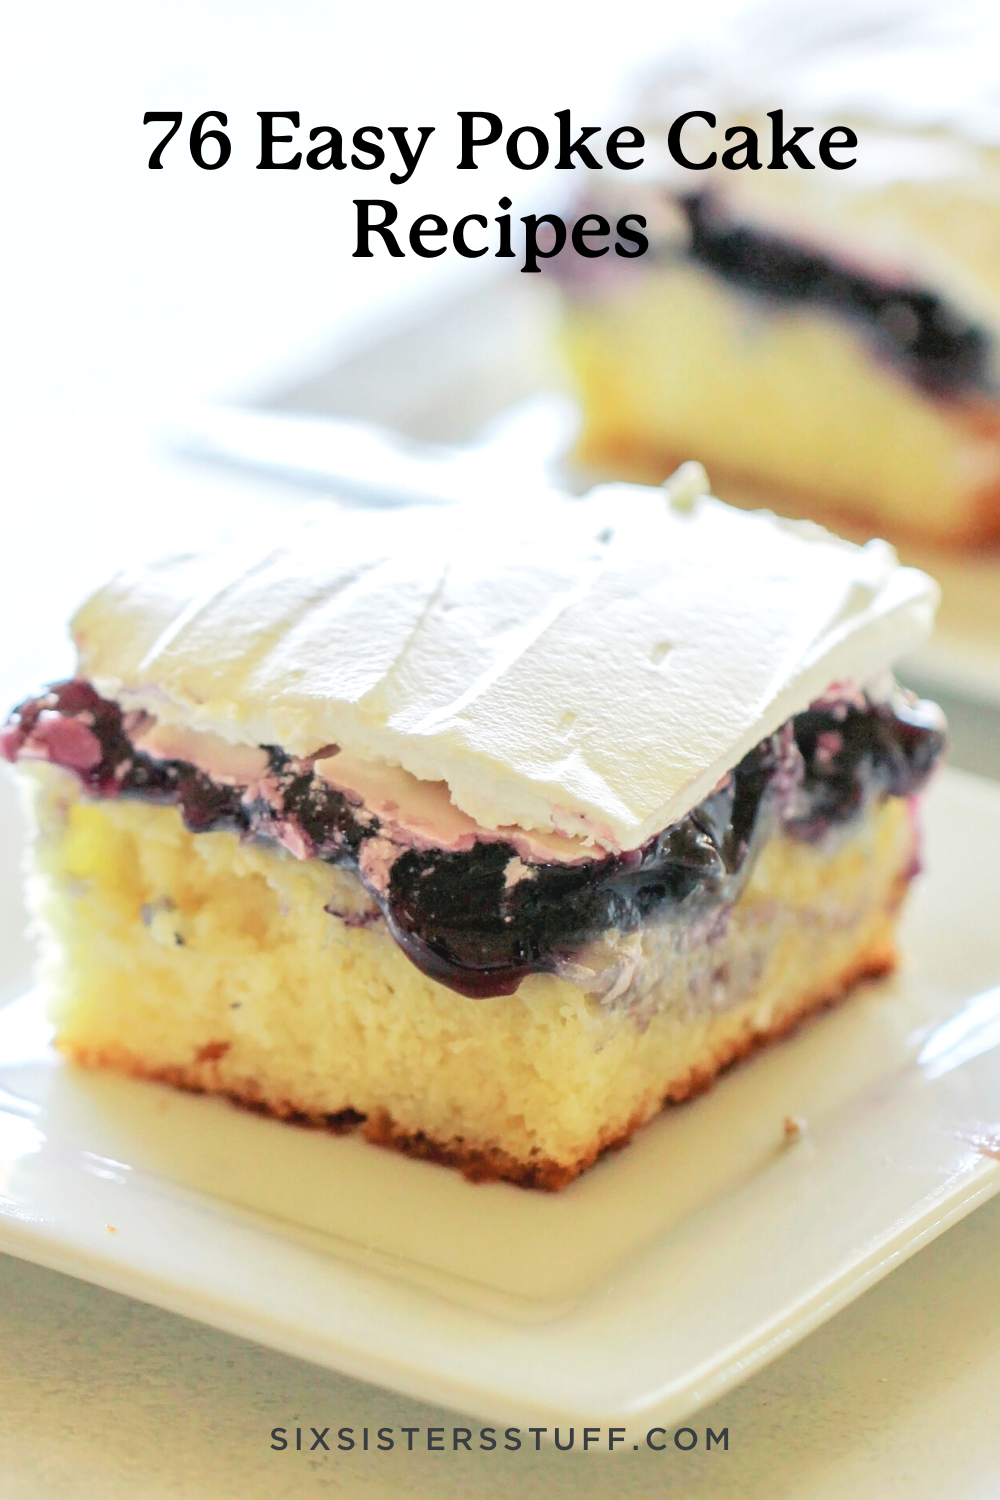 Blueberry Cheesecake Pudding Poke Cake Recipe : Irresistibly Delicious and Easy to Make!